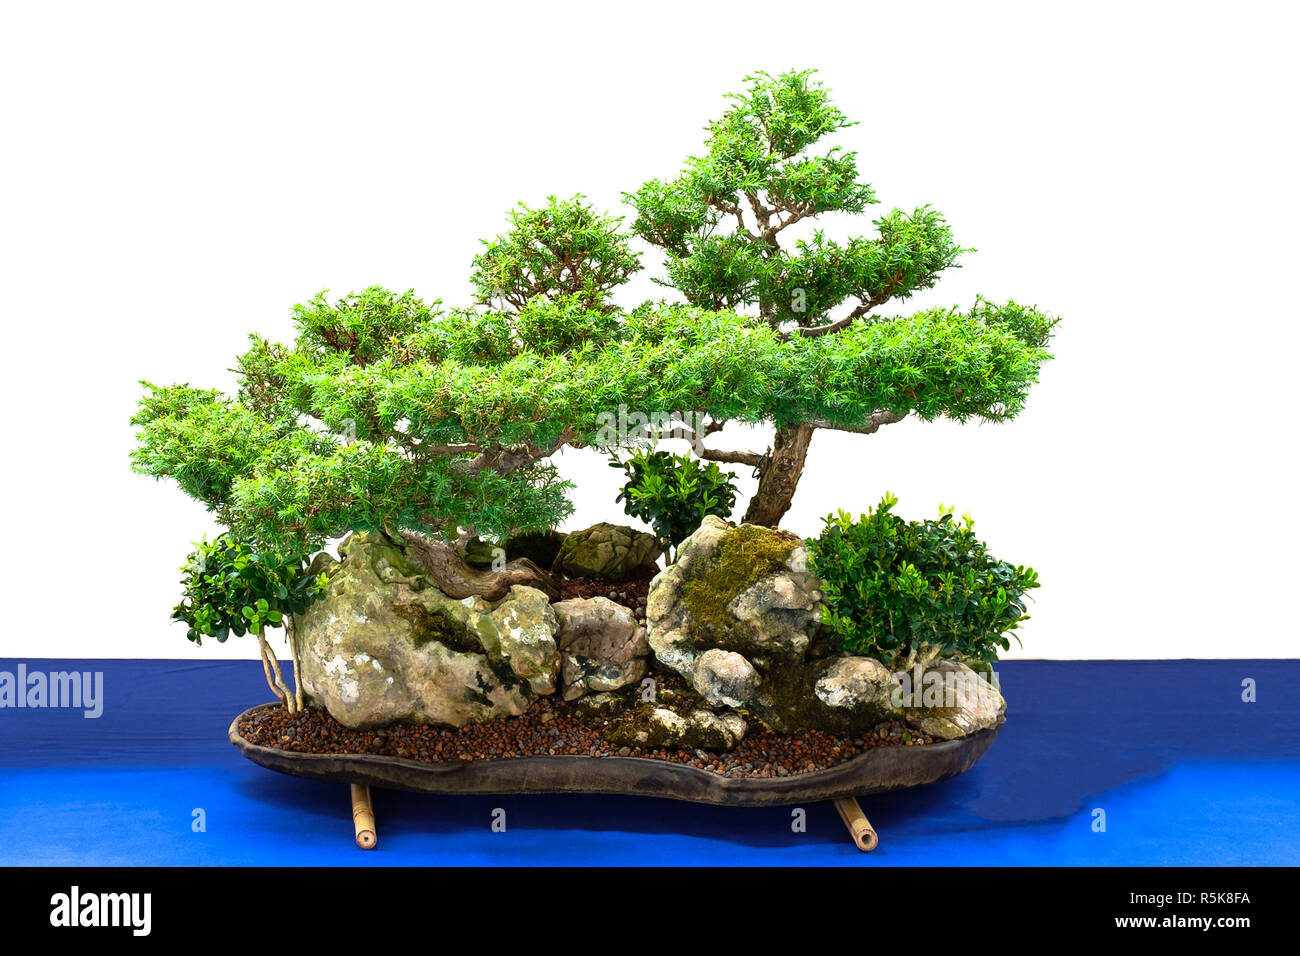 bonsai landscape of cypresses and bushes Stock Photo